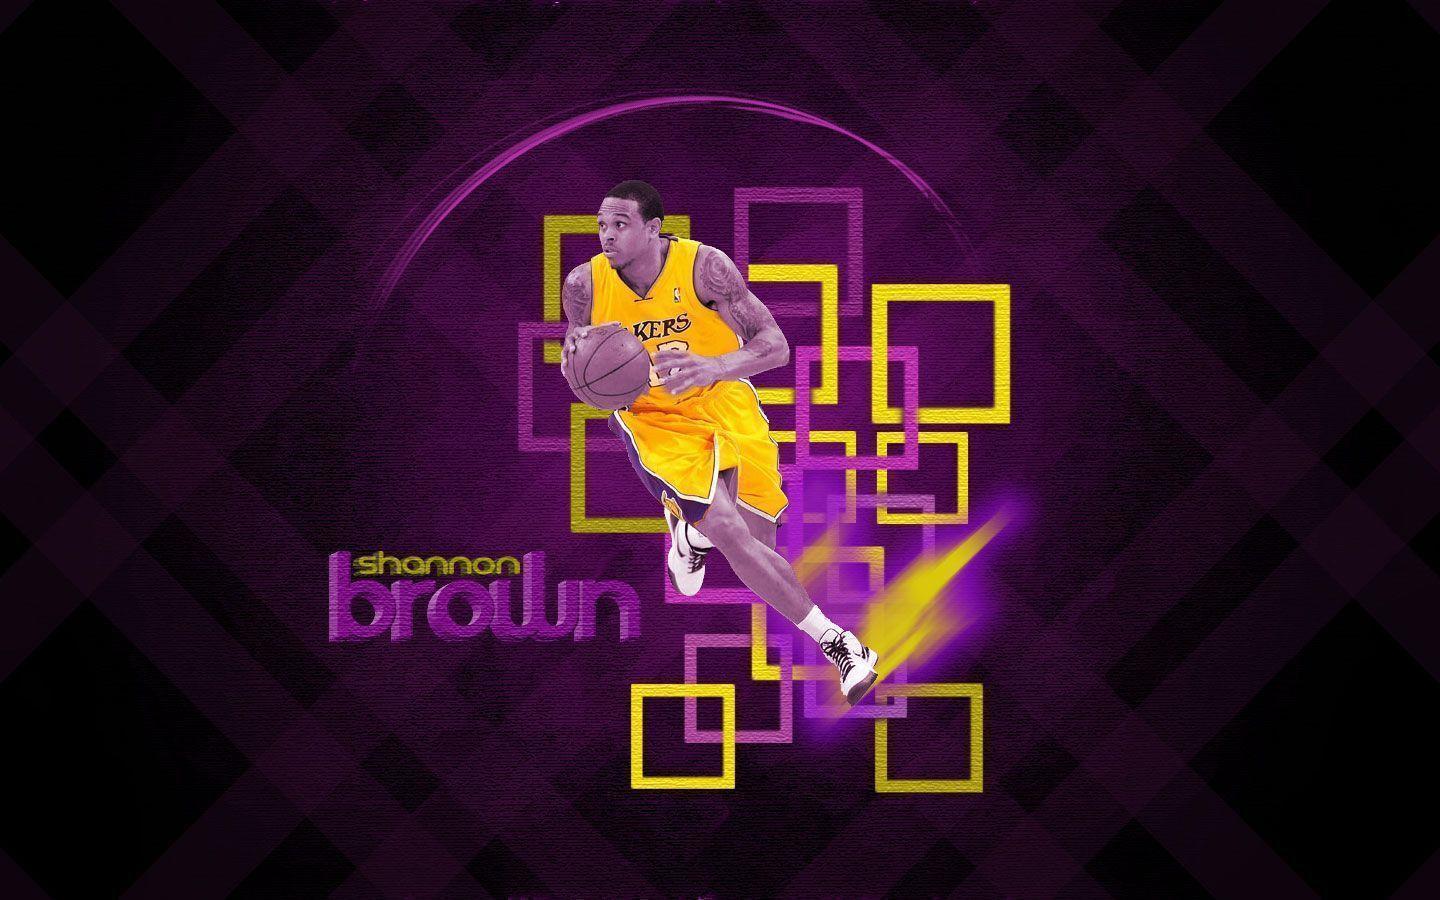 Lakers Wallpaper and Background